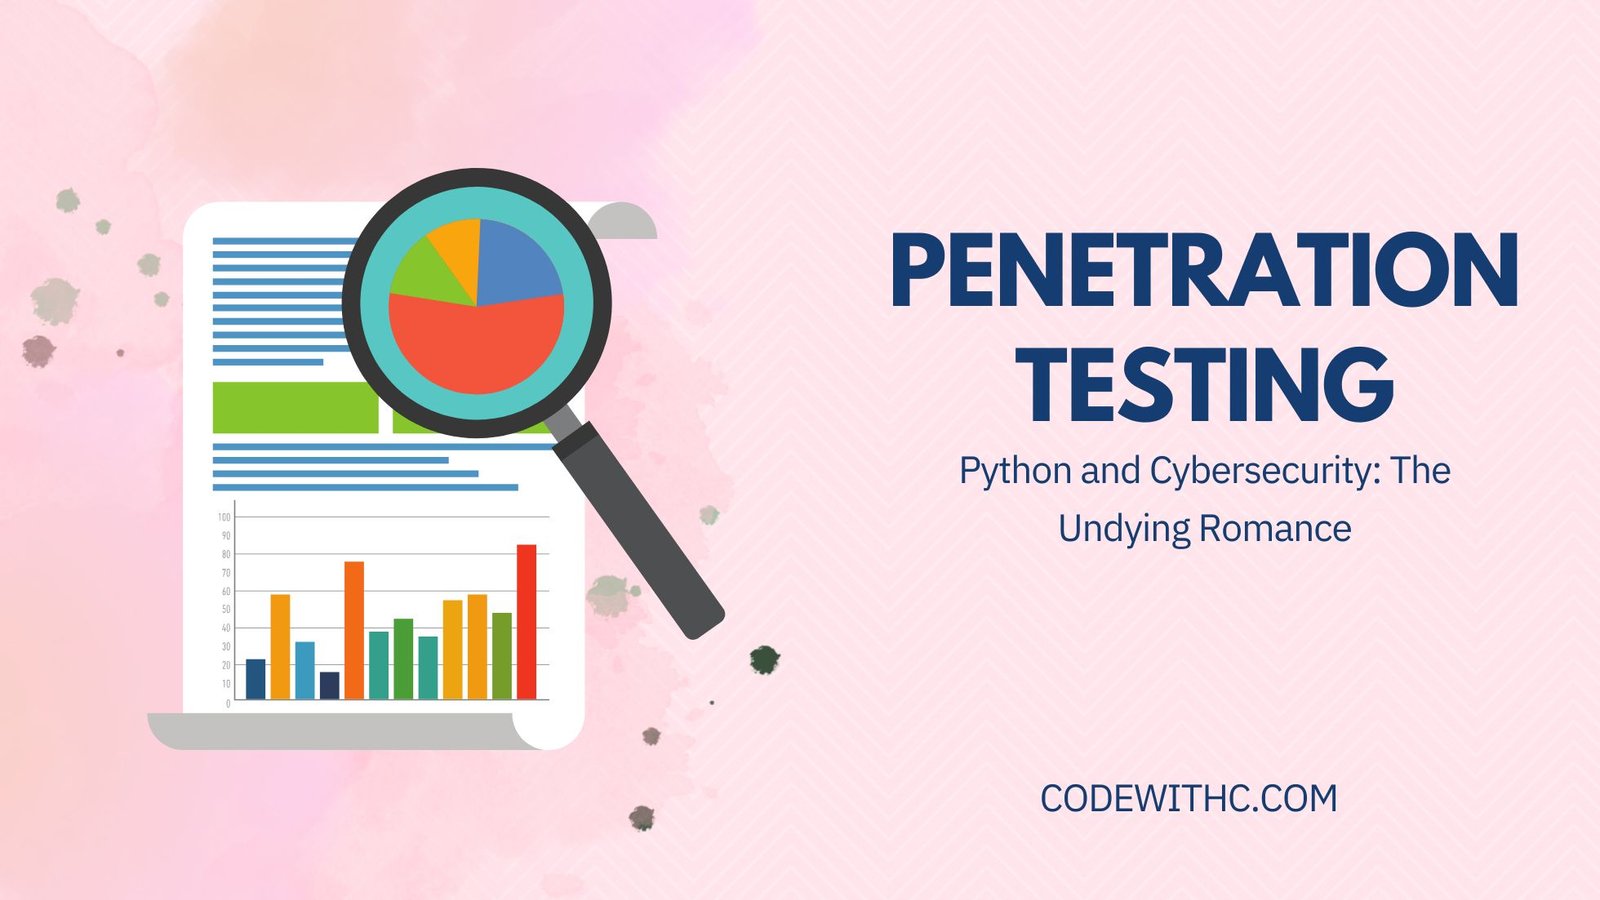 Python and Cybersecurity: The Undying Romance of Penetration Testing